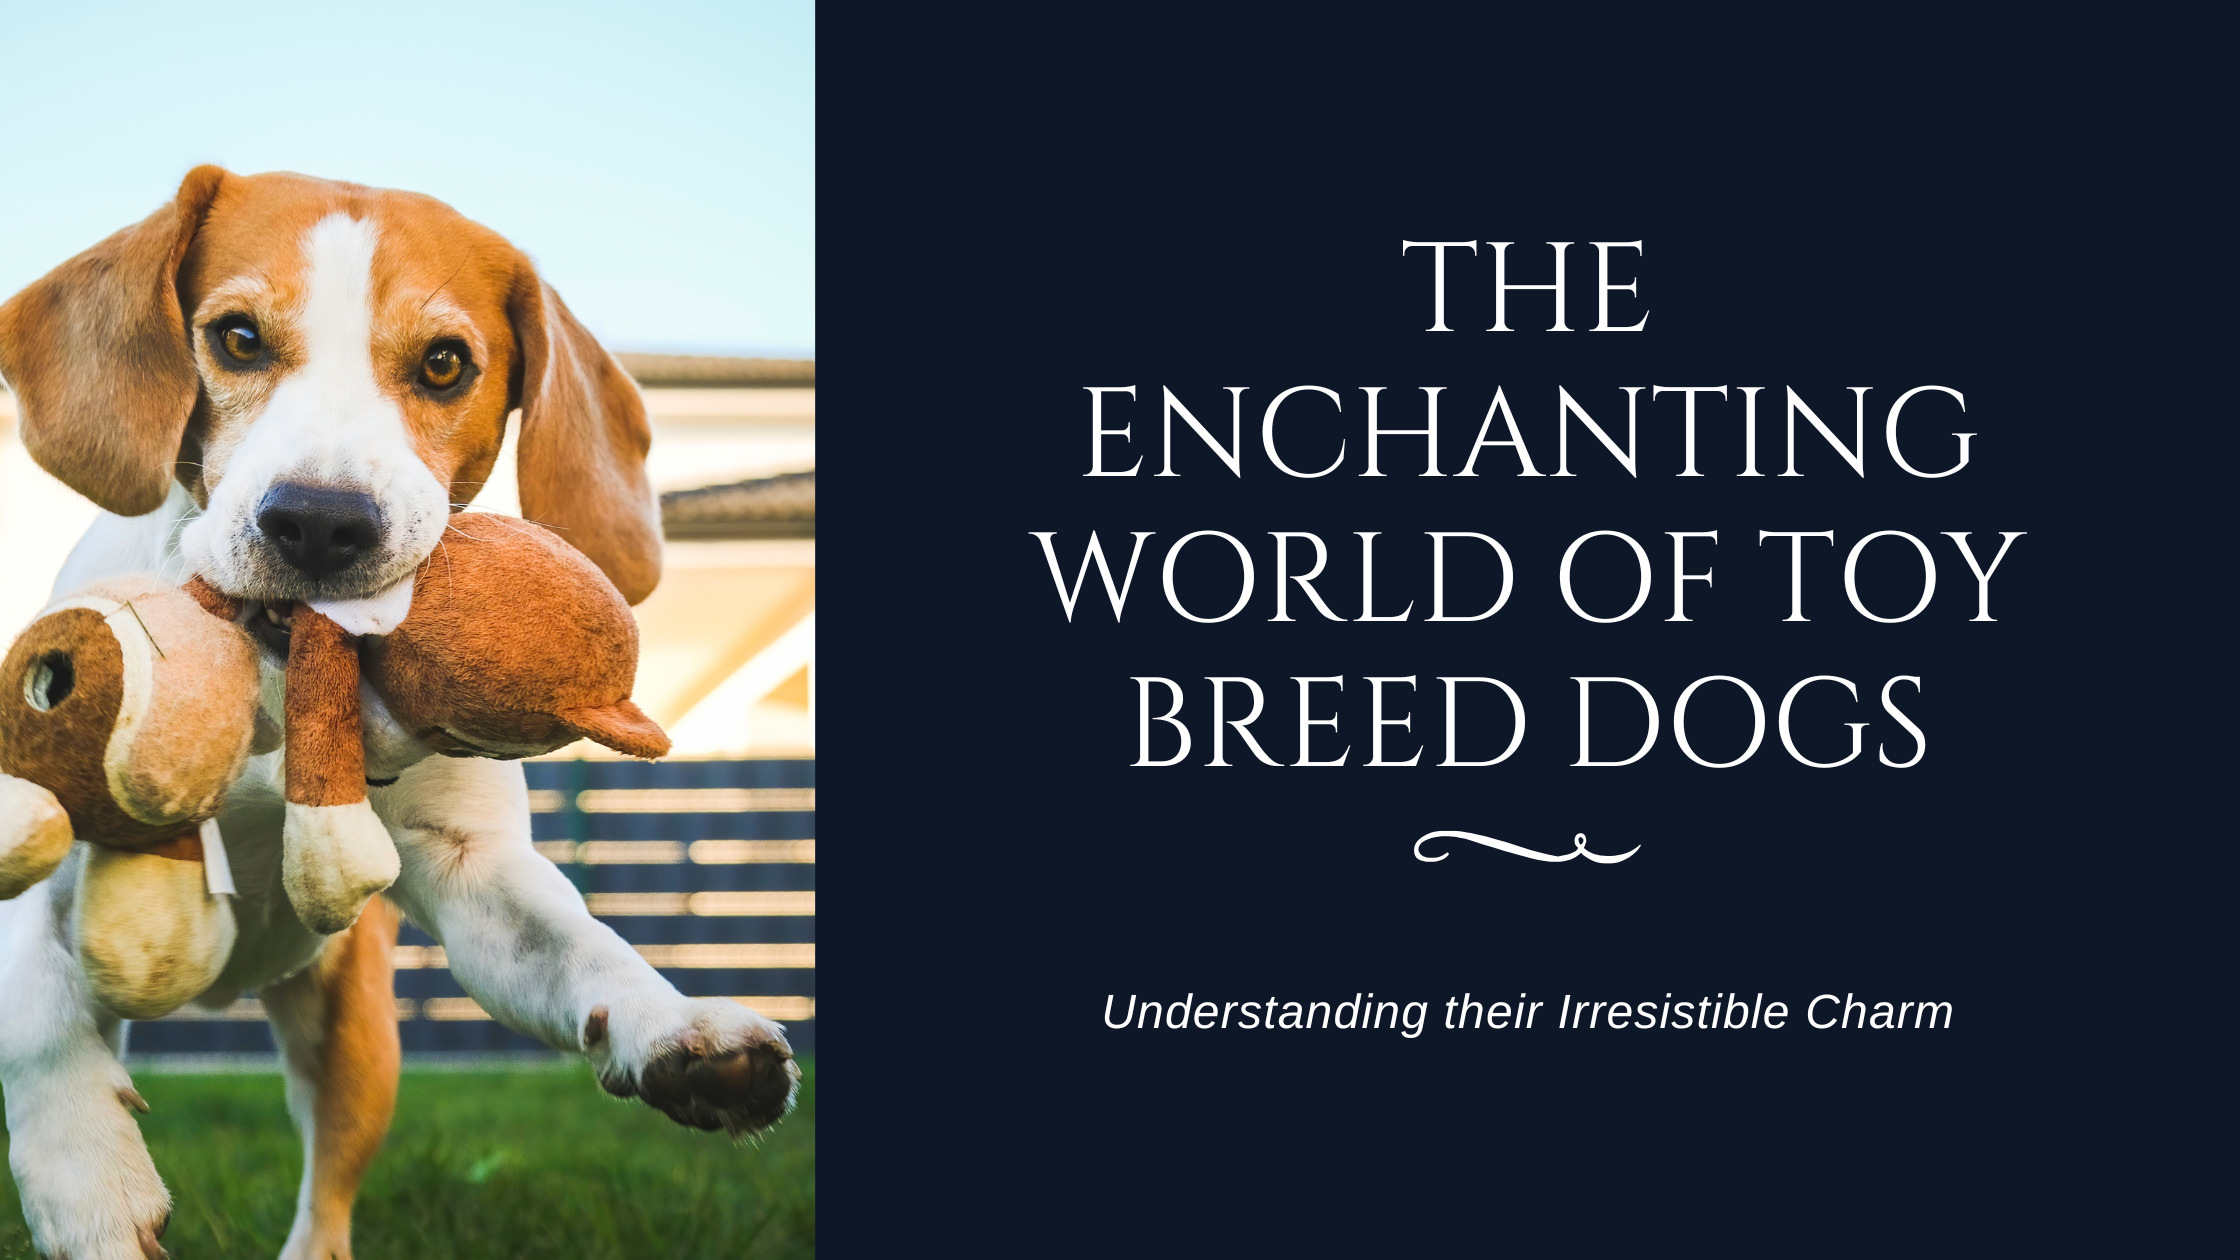 The Enchanting World of Toy Breed Dogs: Understanding their Irresistible Charm